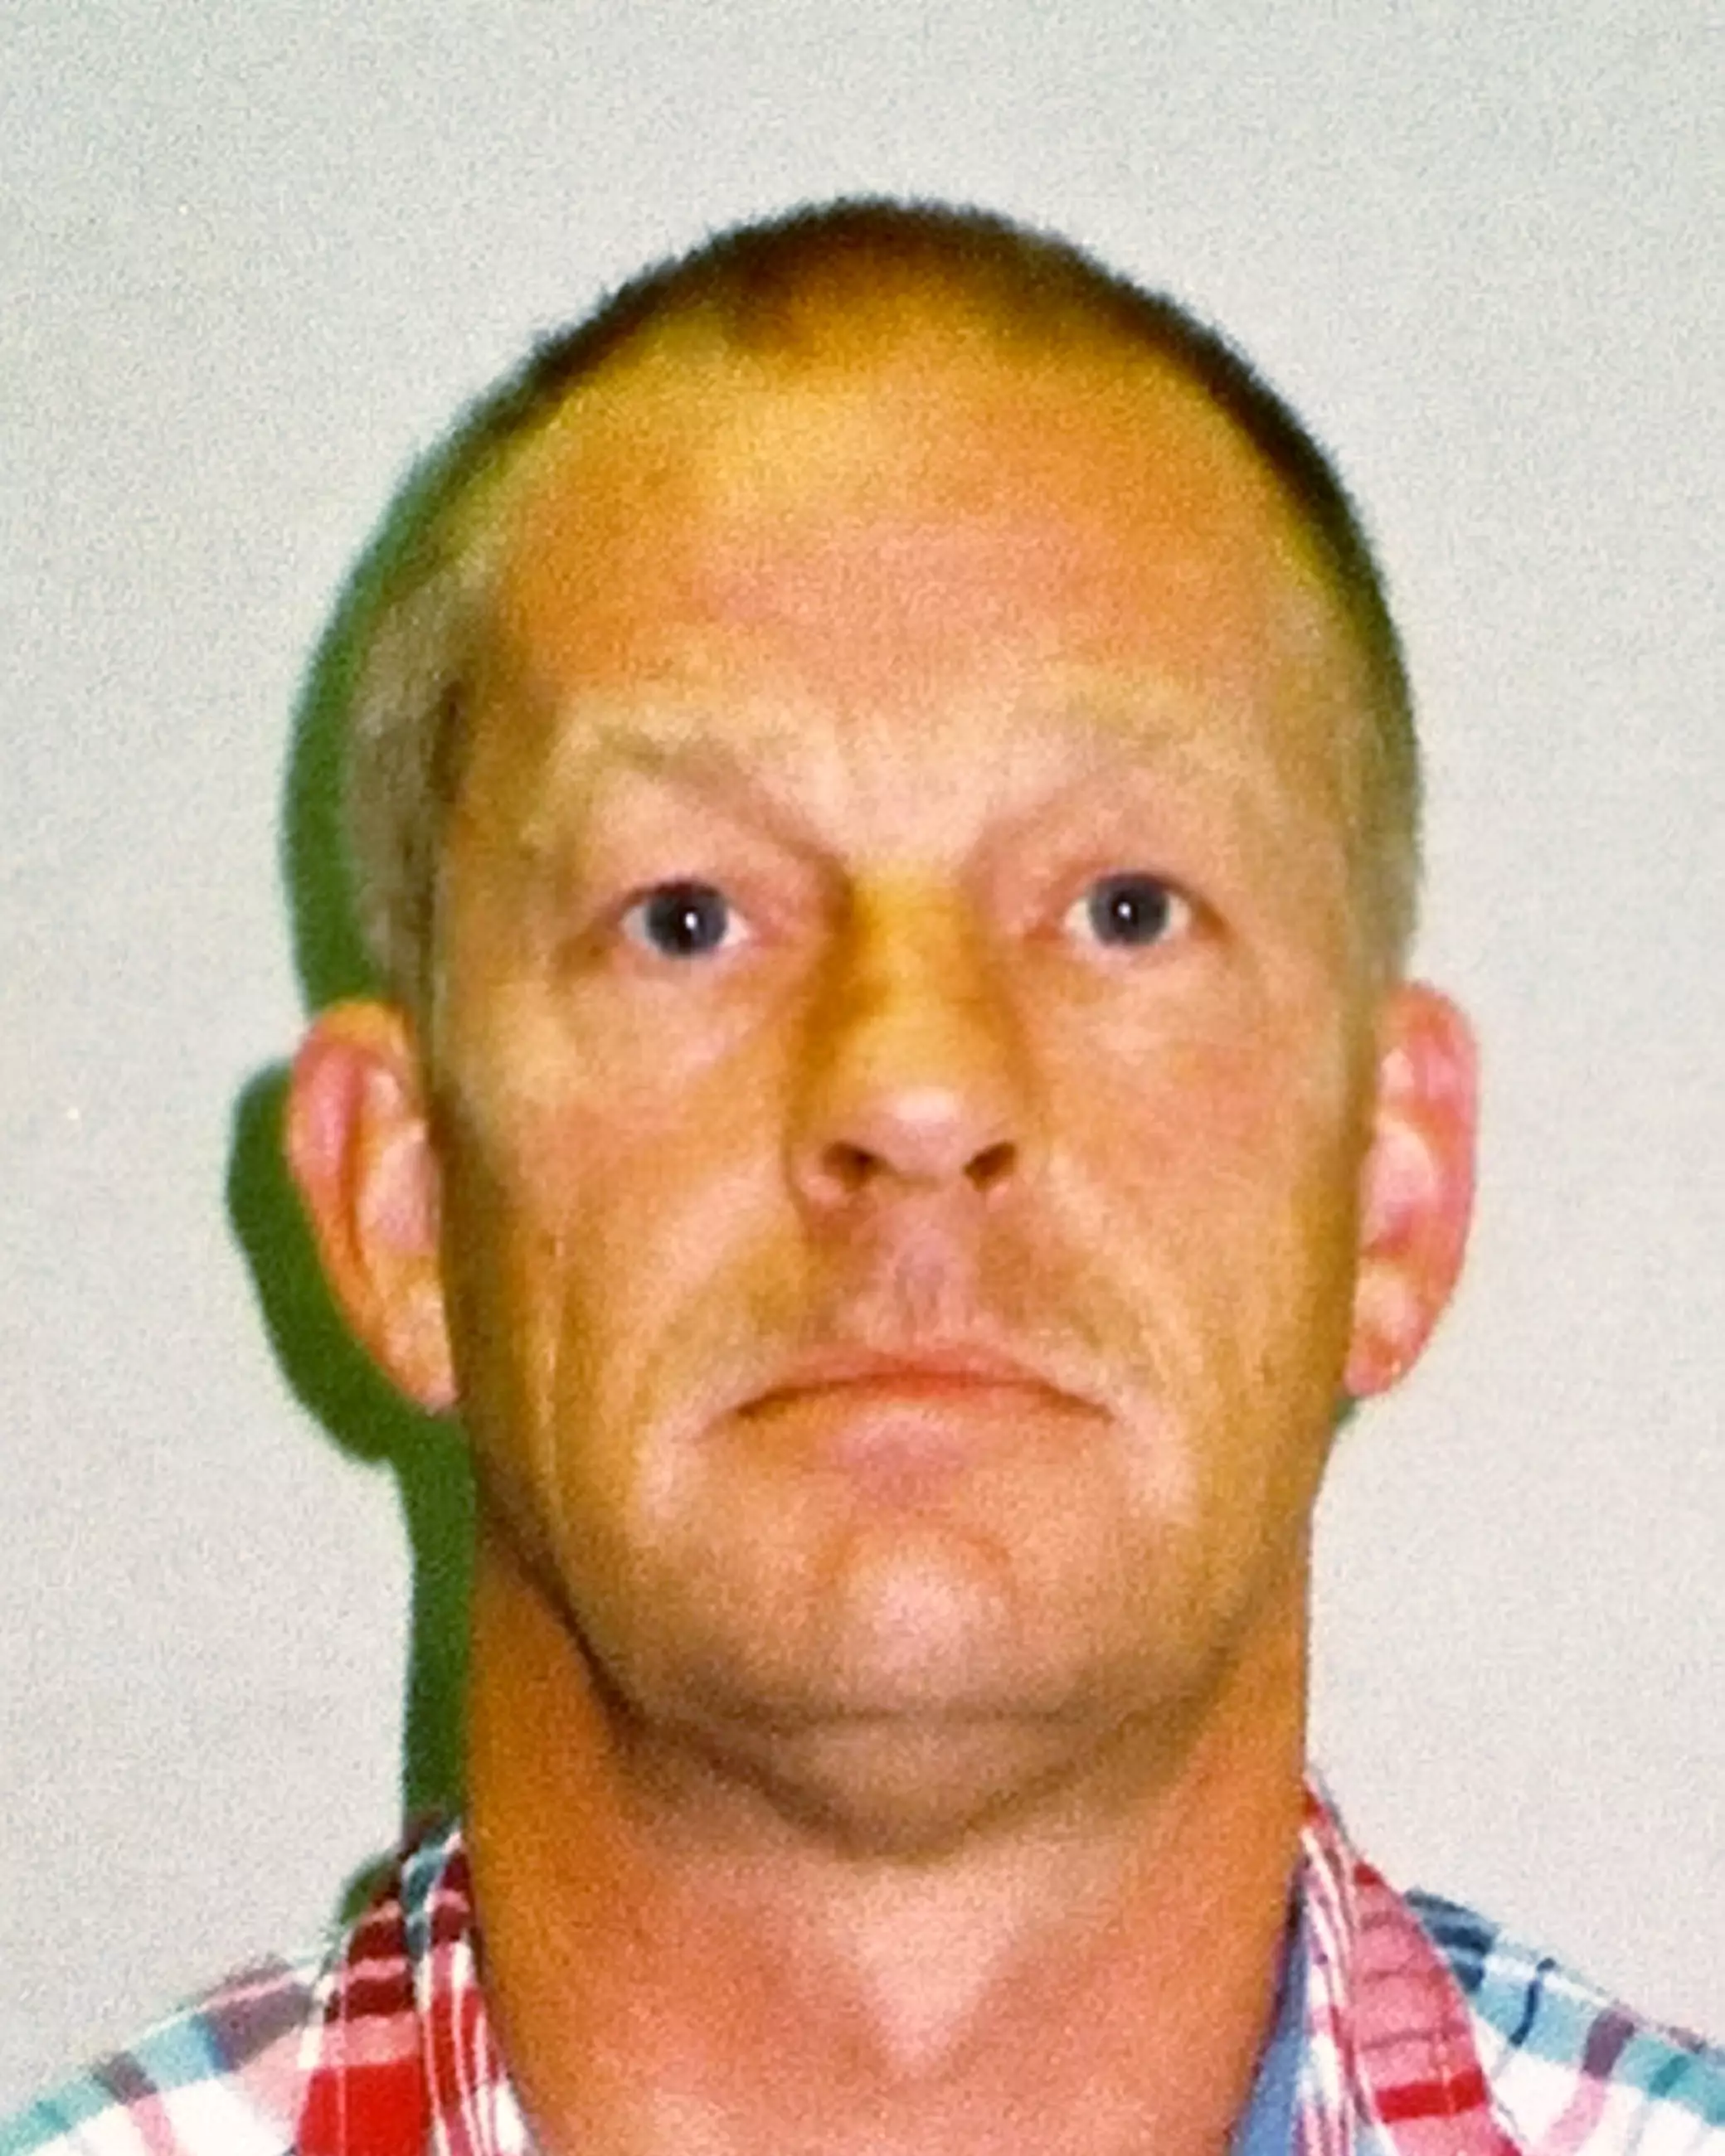 Davies was handed an eight-and-a-half year sentence.